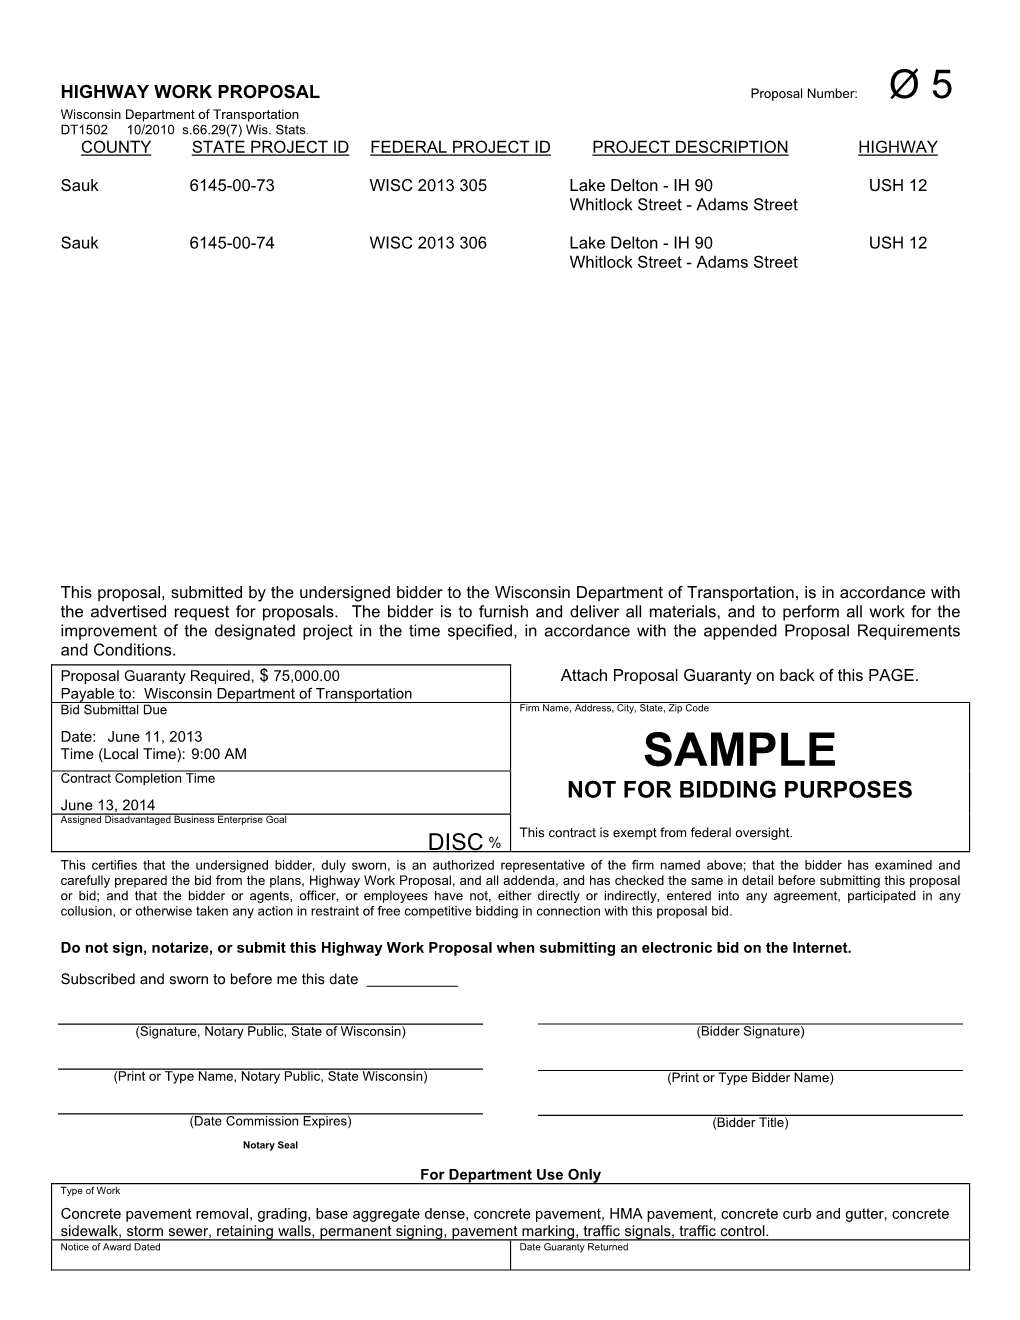 SAMPLE Contract Completion Time NOT for BIDDING PURPOSES June 13, 2014 Assigned Disadvantaged Business Enterprise Goal This Contract Is Exempt from Federal Oversight